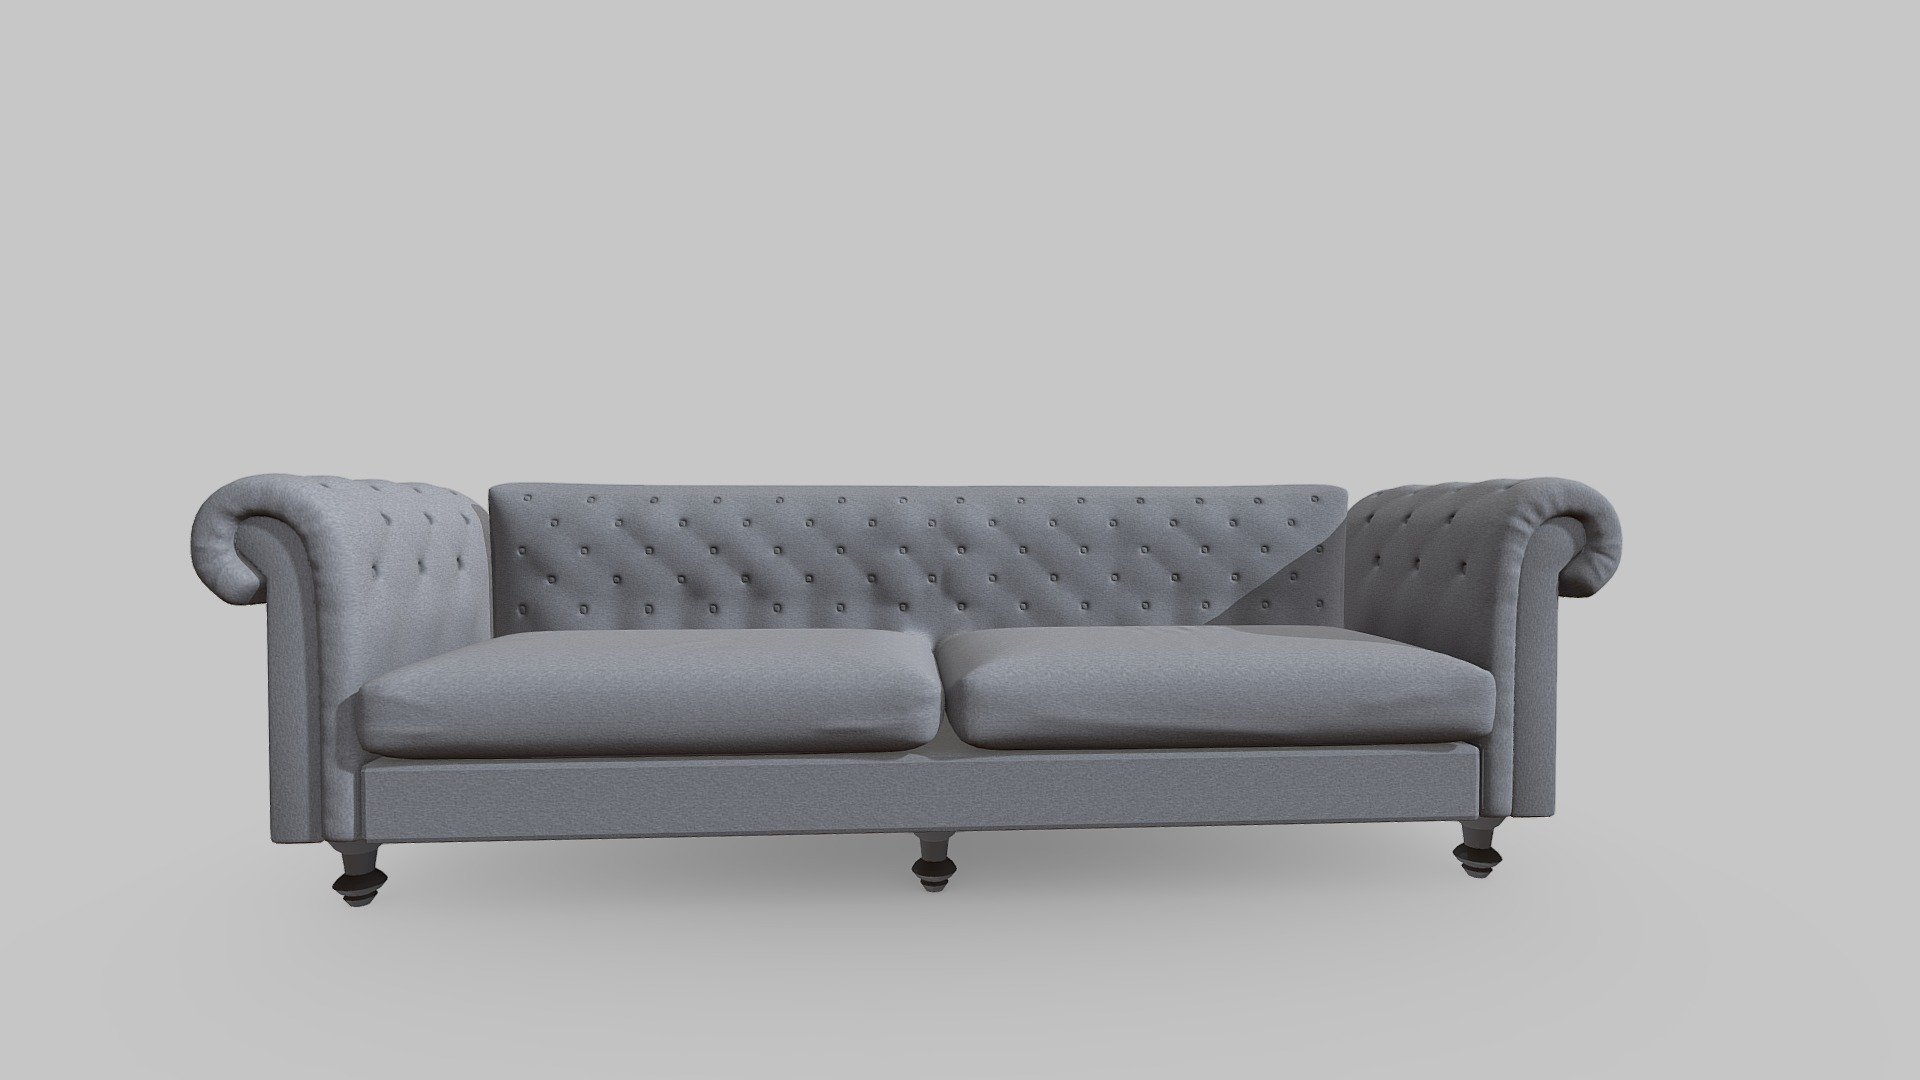 A nice high detailed model of a Chelsey style couch.  Perfect for interior design showcases.  The model is designed to keep as much detail as possible in the mesh with added baked textures to bring out the creases in the cloth 3d model